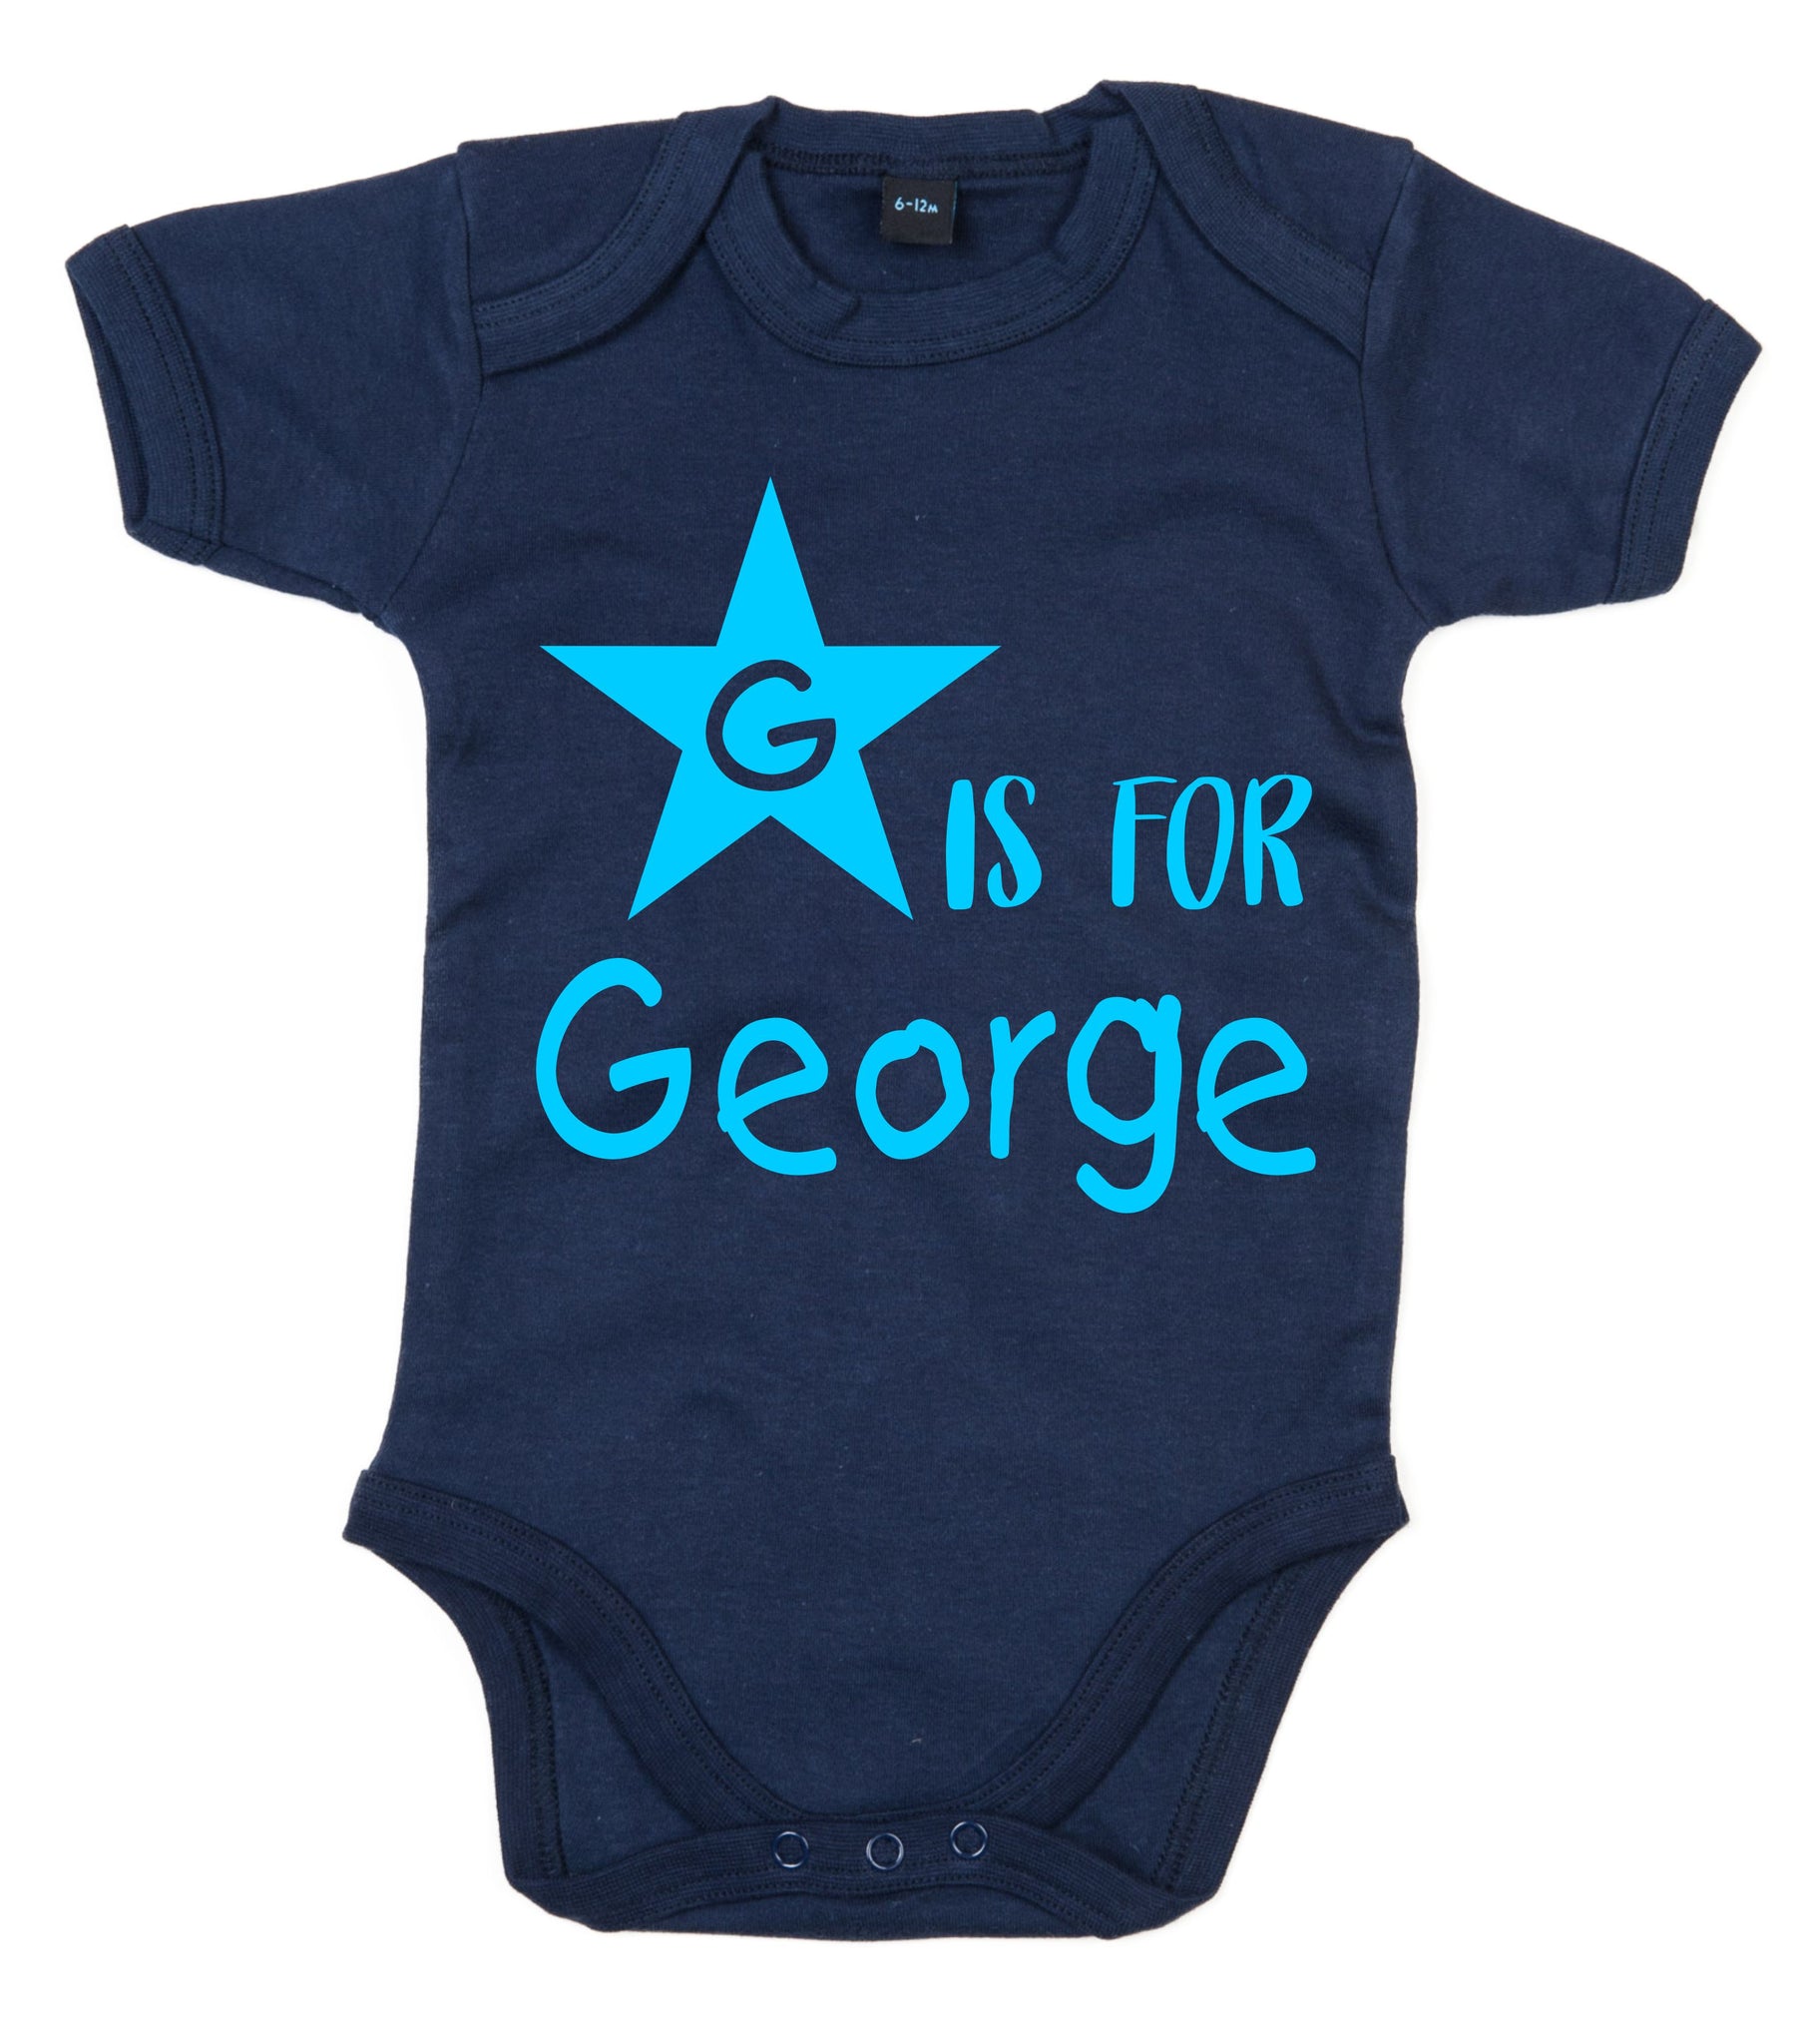 Initial Is for Name Baby Bodysuit